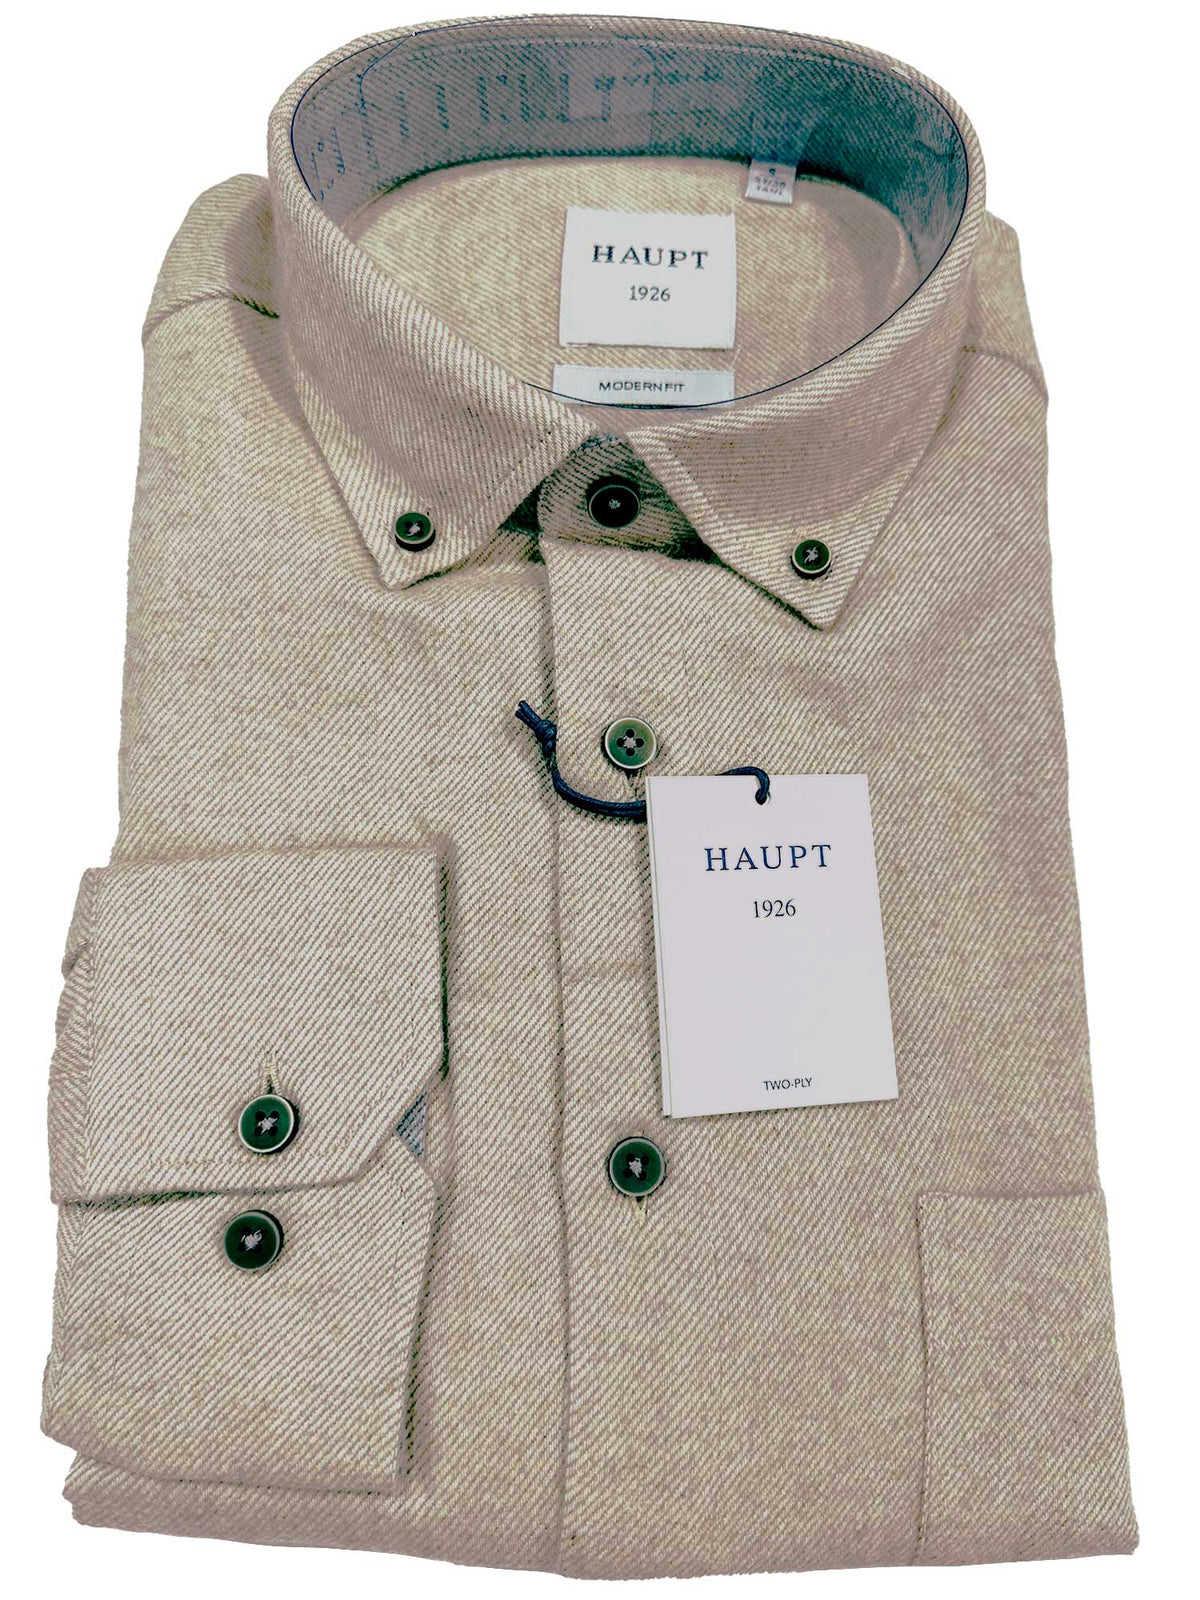 2414-82  https://harrysformenswear.com.au/products/2414-82  For almost a century, Haupt Fashion Group has been producing quality and creative textiles. Our collections are designed for quality and comfort, resulting in unique details. Well-known worldwide, we now deliver to Harrys. All Cotton Flanell Designed in Europe Modern Fit Chest Pocket